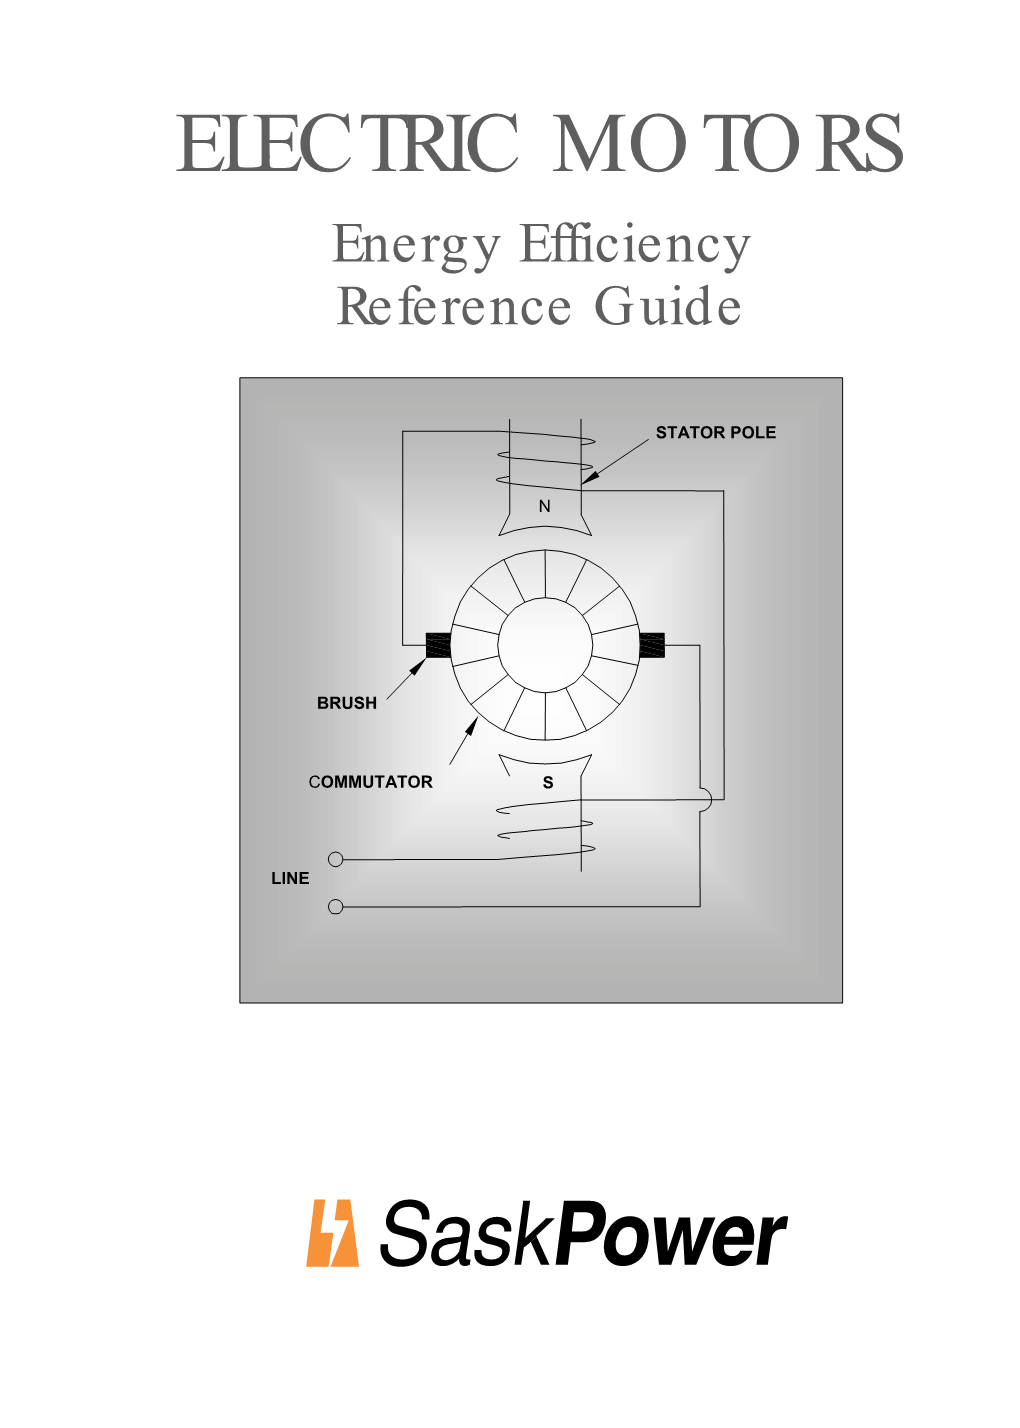 Energy Efficiency Reference Guide